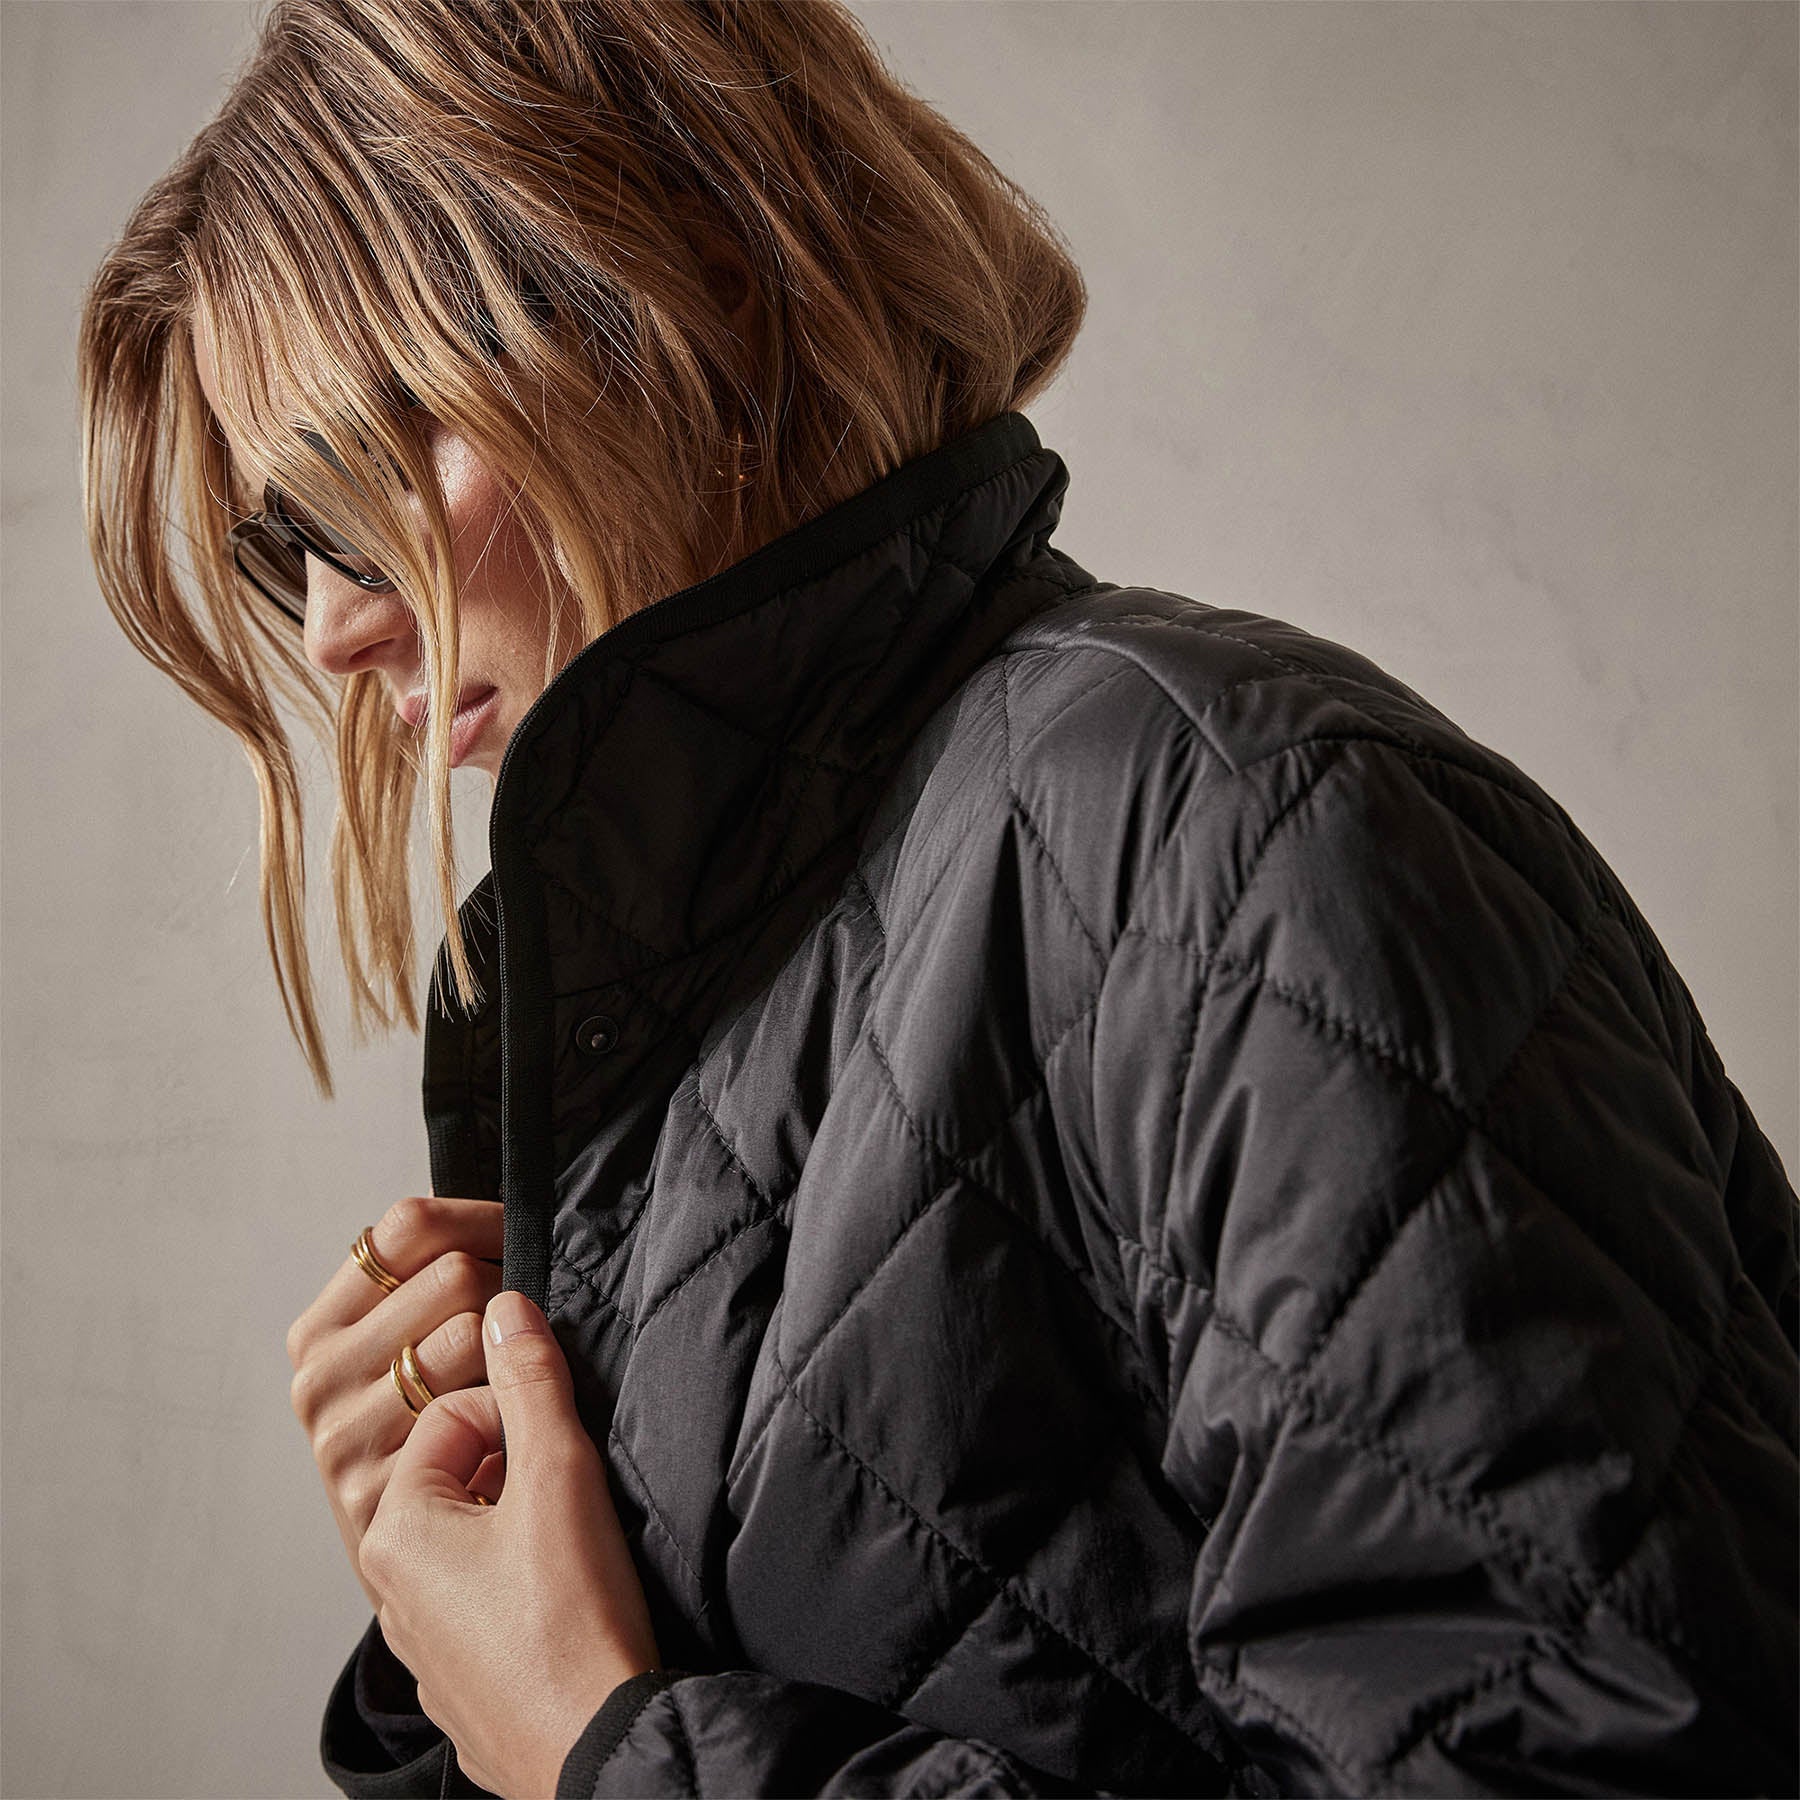 Women's Quilted Puffer Jacket - All In Motion™ Black XS